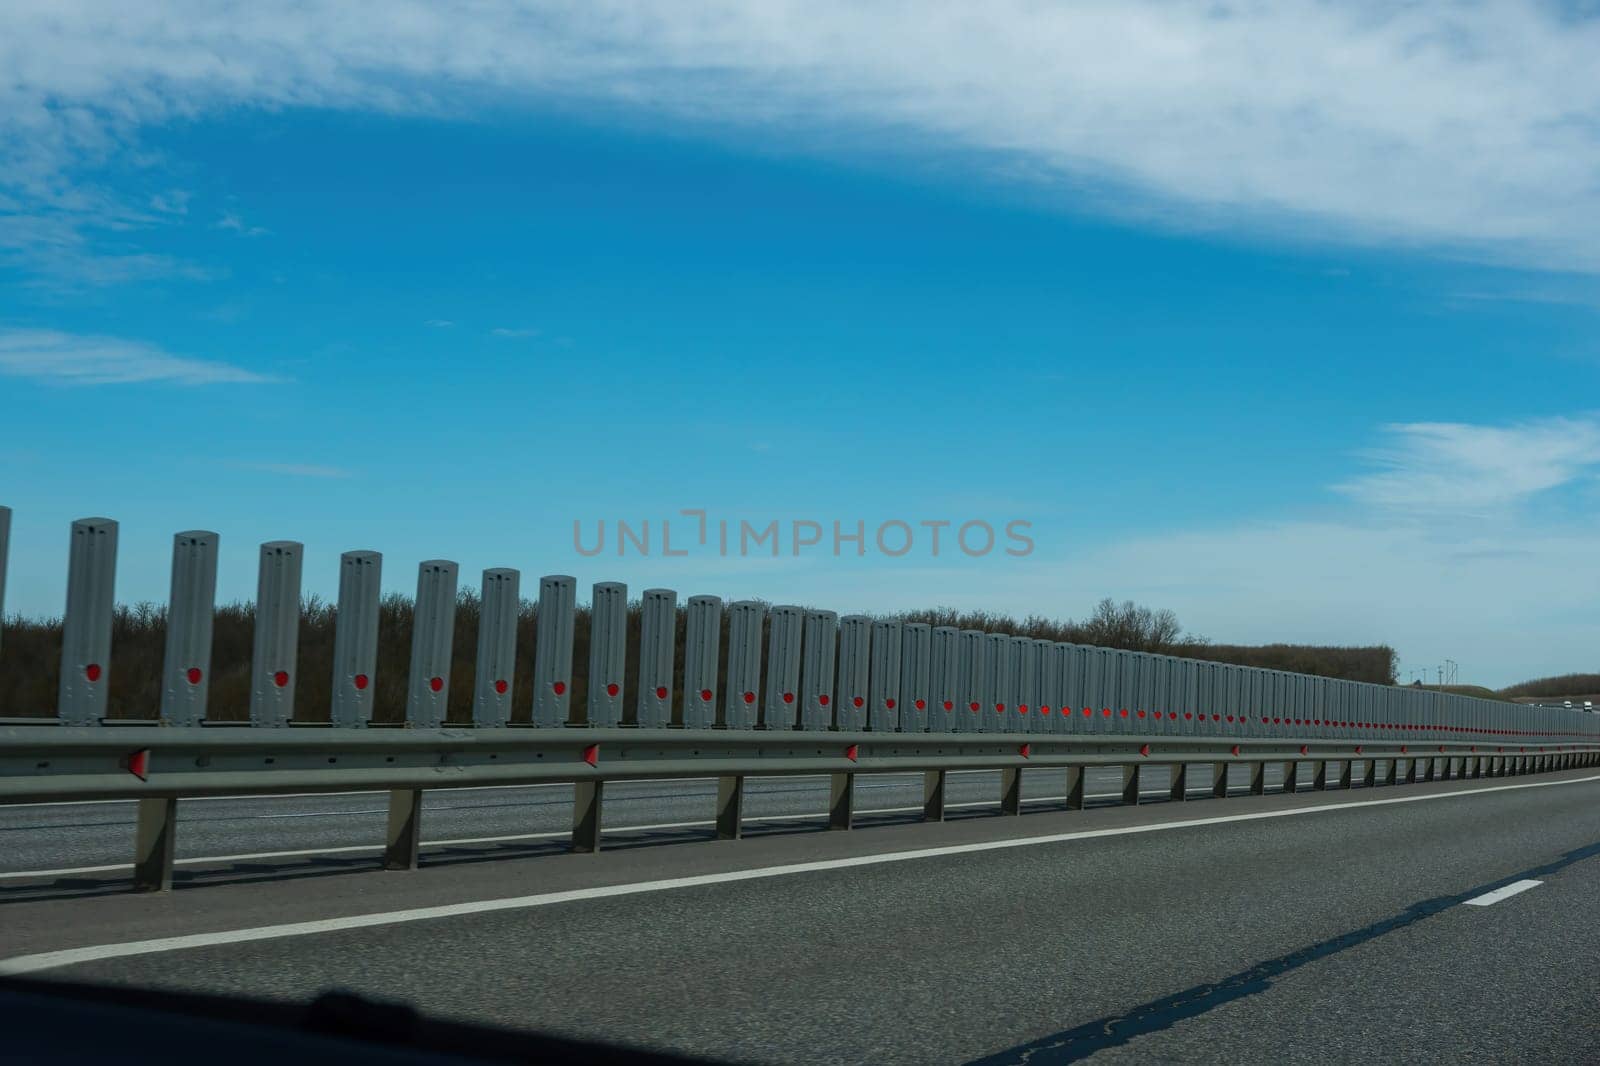 A road with a long line of metal posts with red hearts on them. The road is empty and the sky is clear. by Matiunina